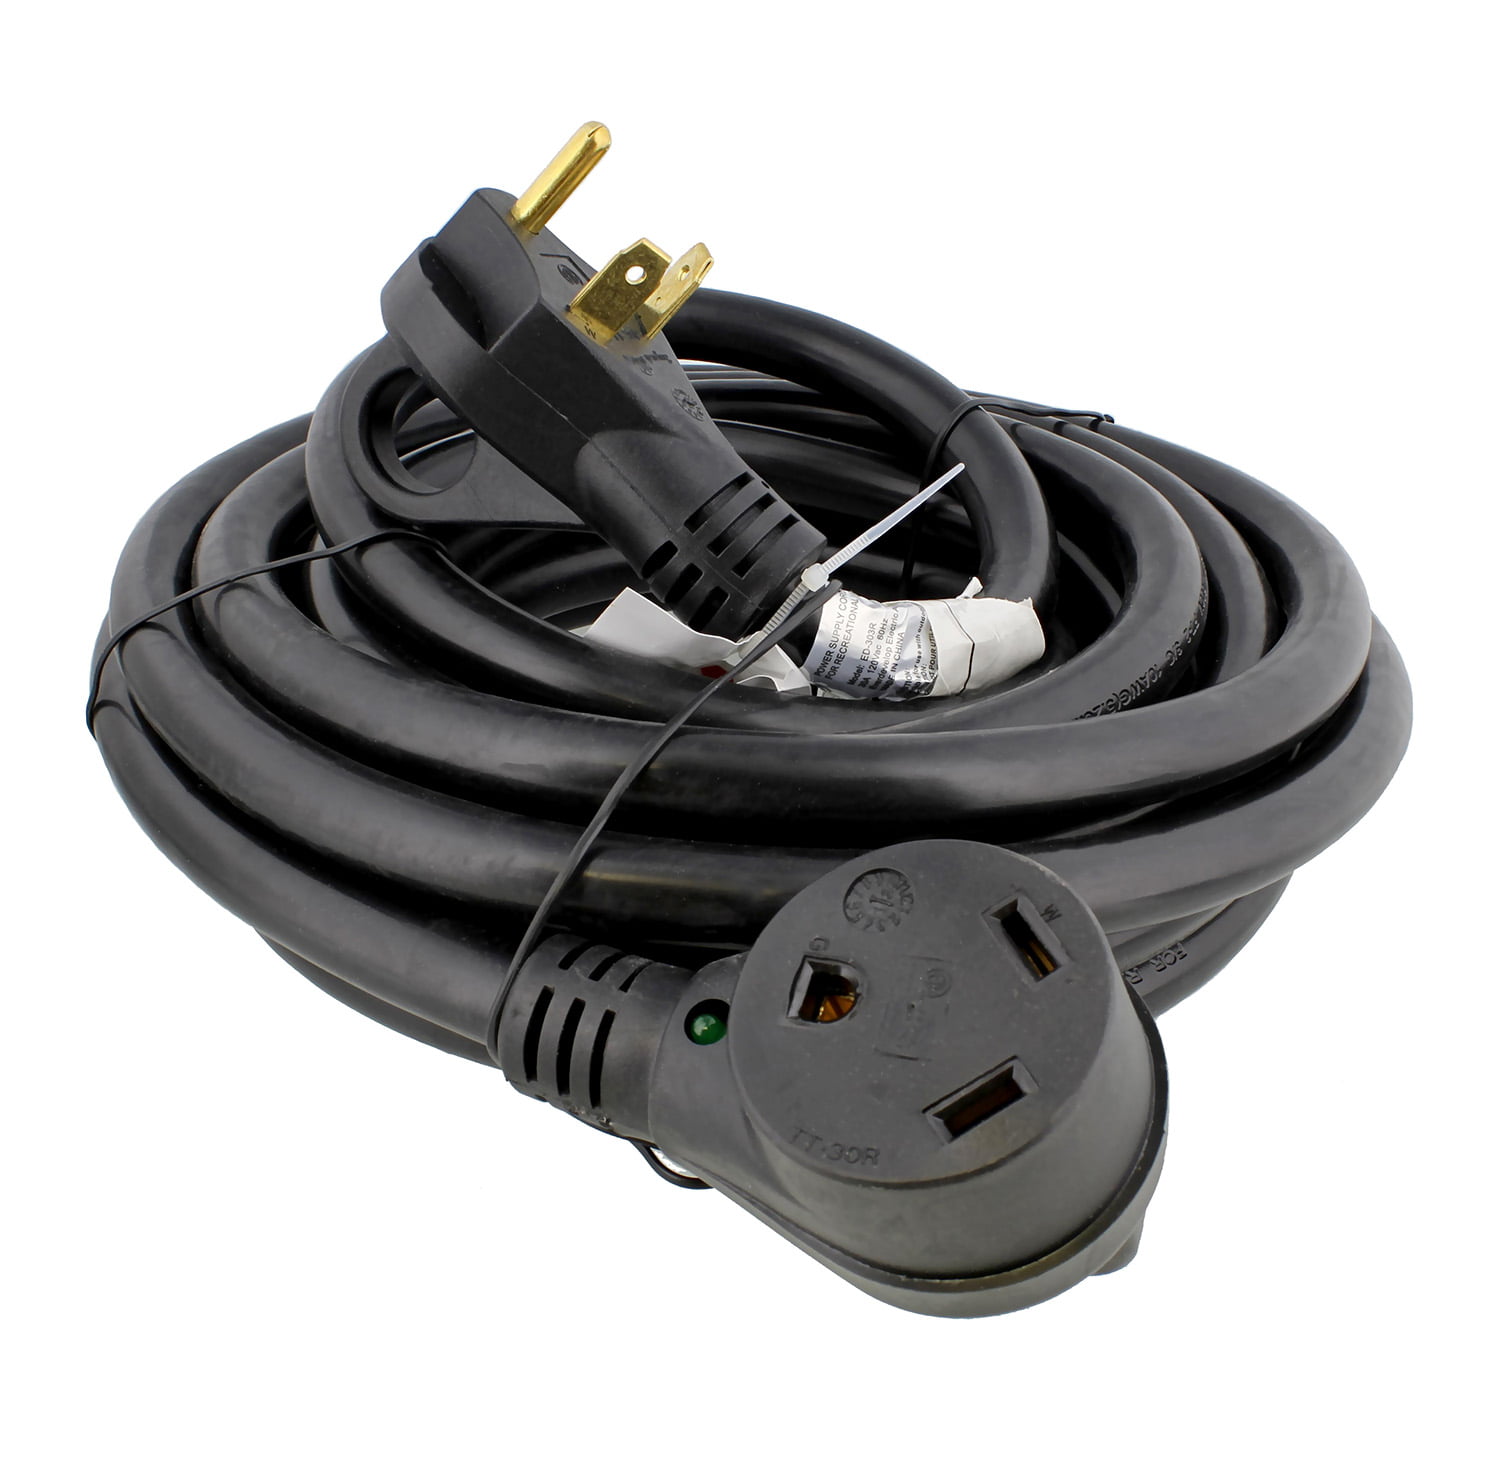 30 amp extension cord ends